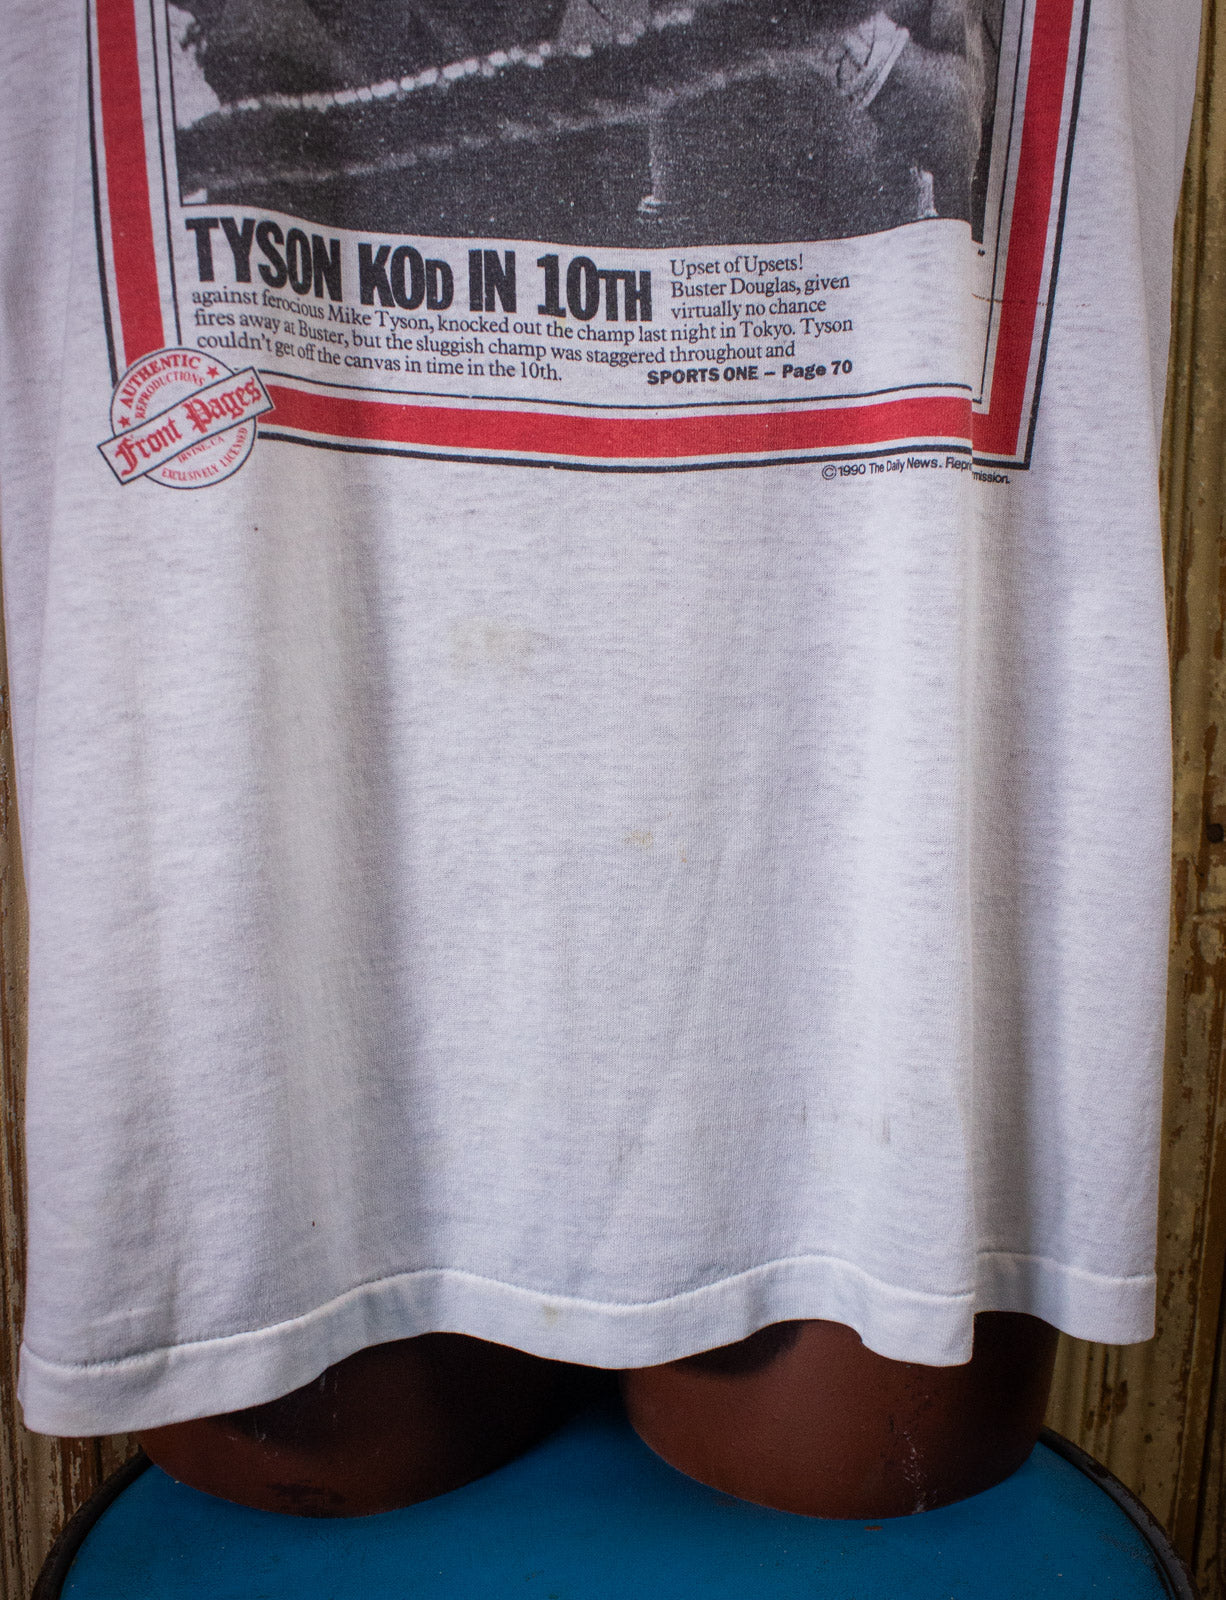 Vintage Mike Tyson Busted! Graphic T Shirt 1990 White XL